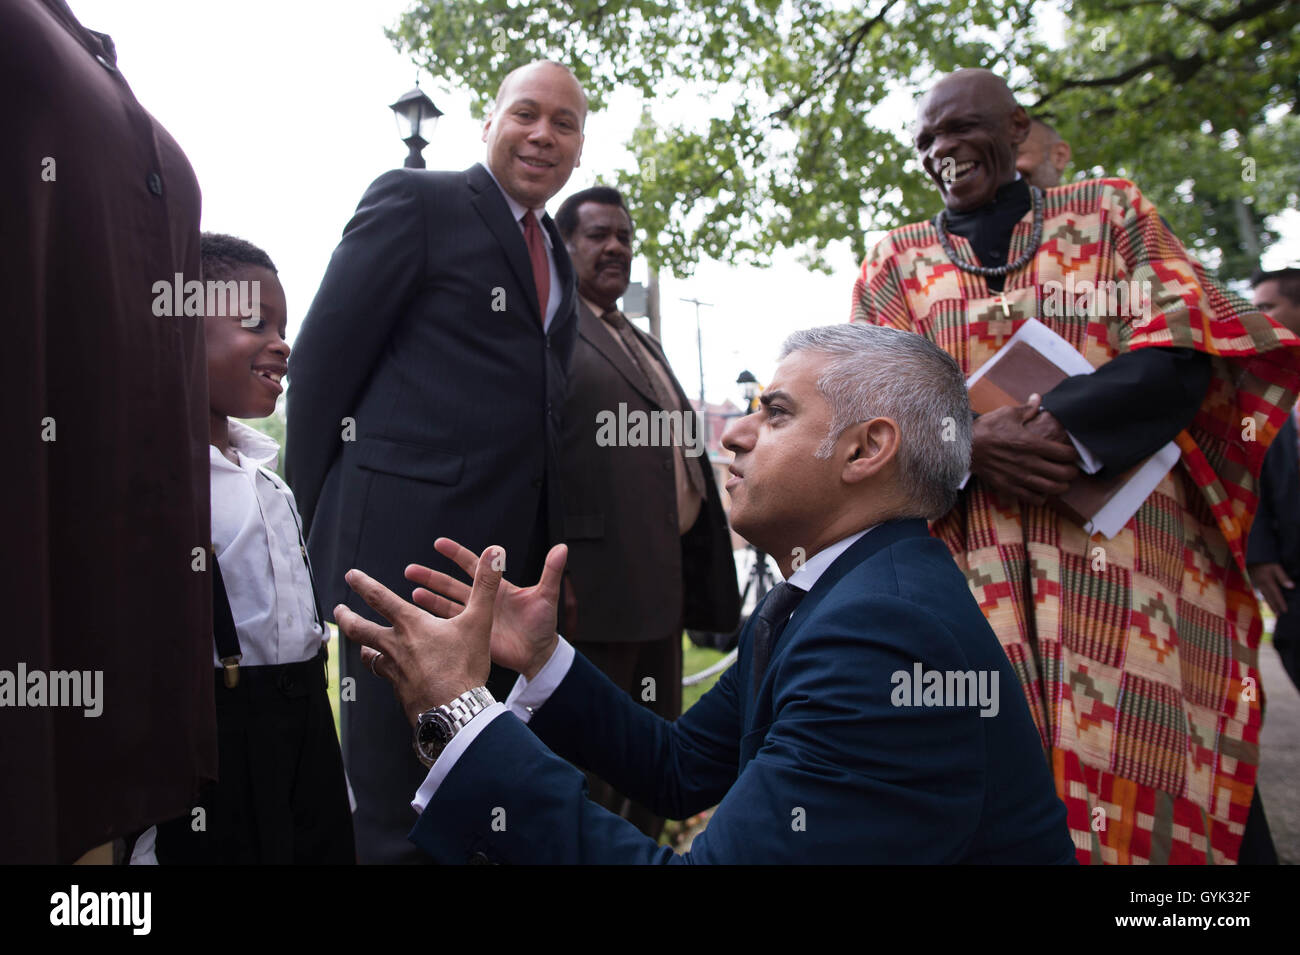 Mayor of London Sadiq Khan meets members of the congregation at the St Albans Congregational Church in Queens, New York City (NYC) during a three day visit to the US capital as part of his visit to North America. Stock Photo